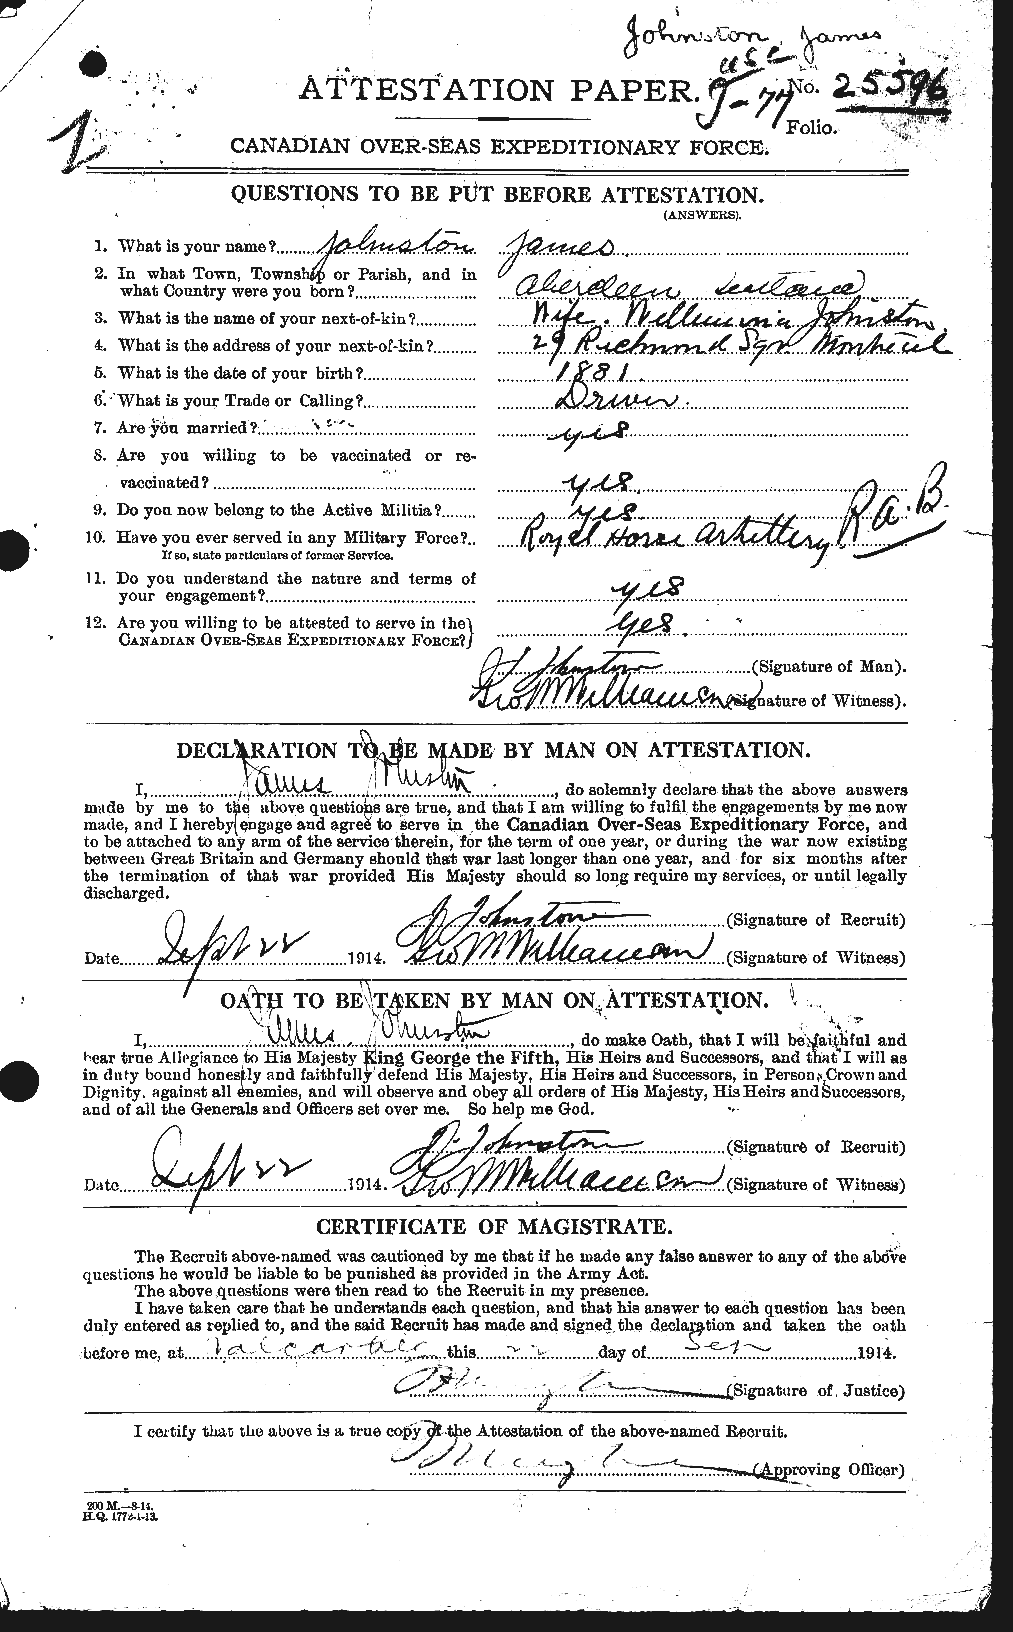 Personnel Records of the First World War - CEF 691487a